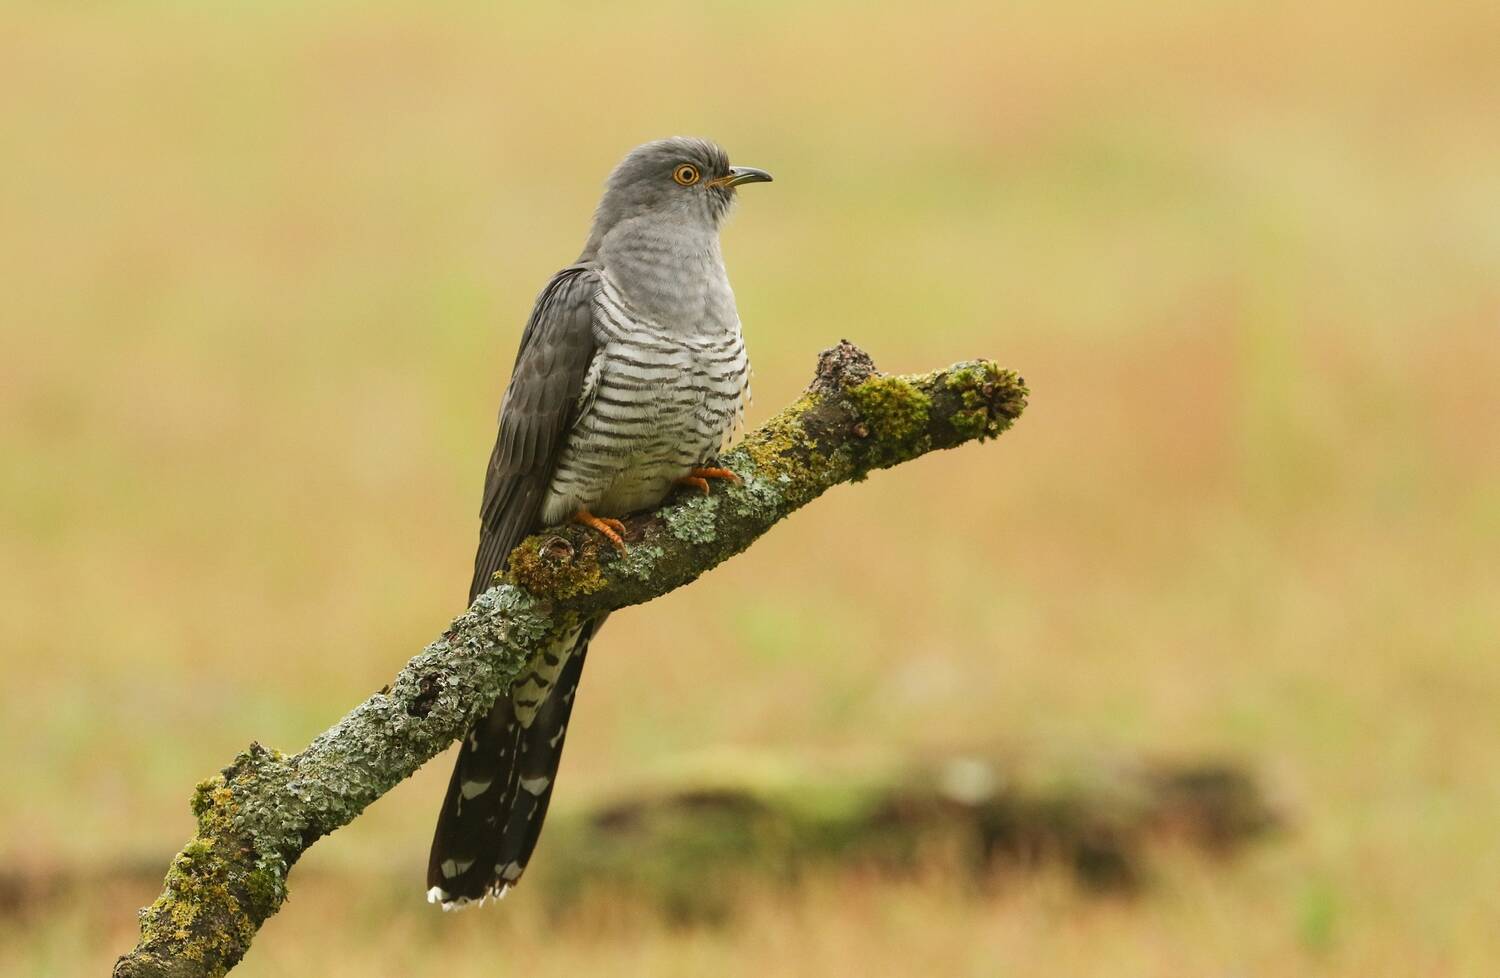 A cuckoo perches on a moss- and lichen-covered branch. It has a grey and white stripe pattern across its chest, and its long grey tail hangs down behind the branch.